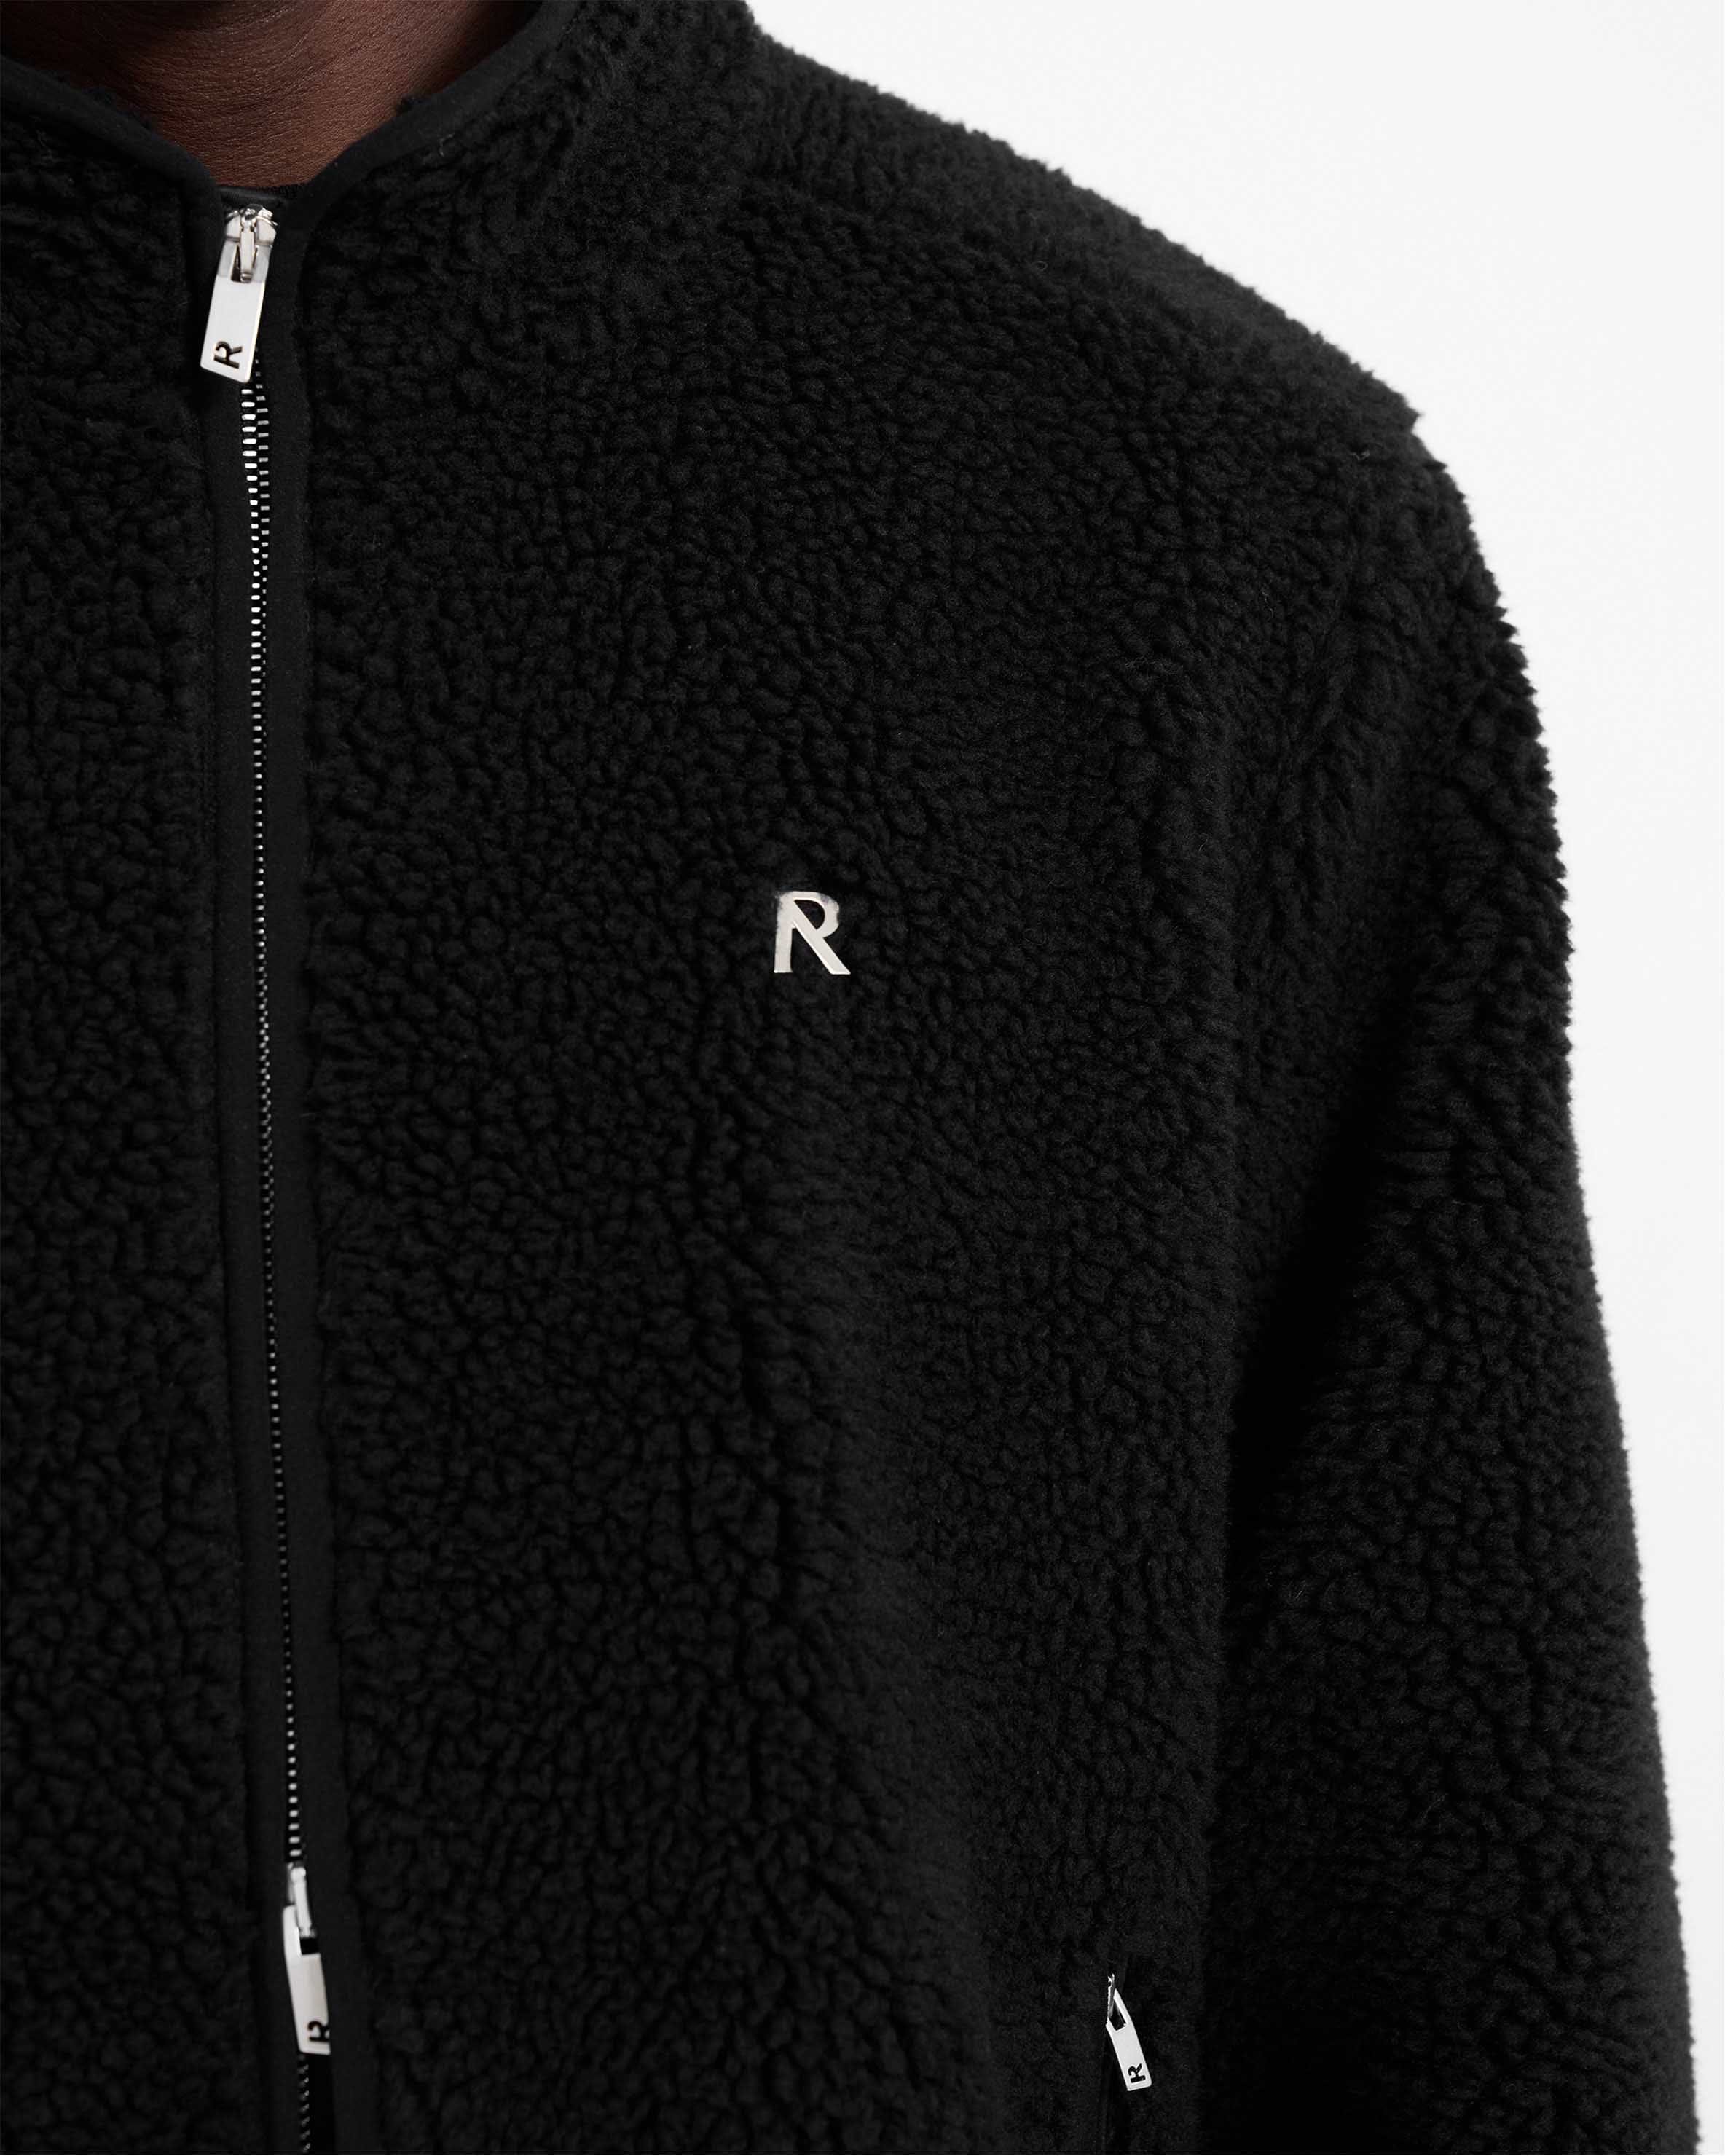 Perks And Mini Patched zip-up fleece jacket - Black